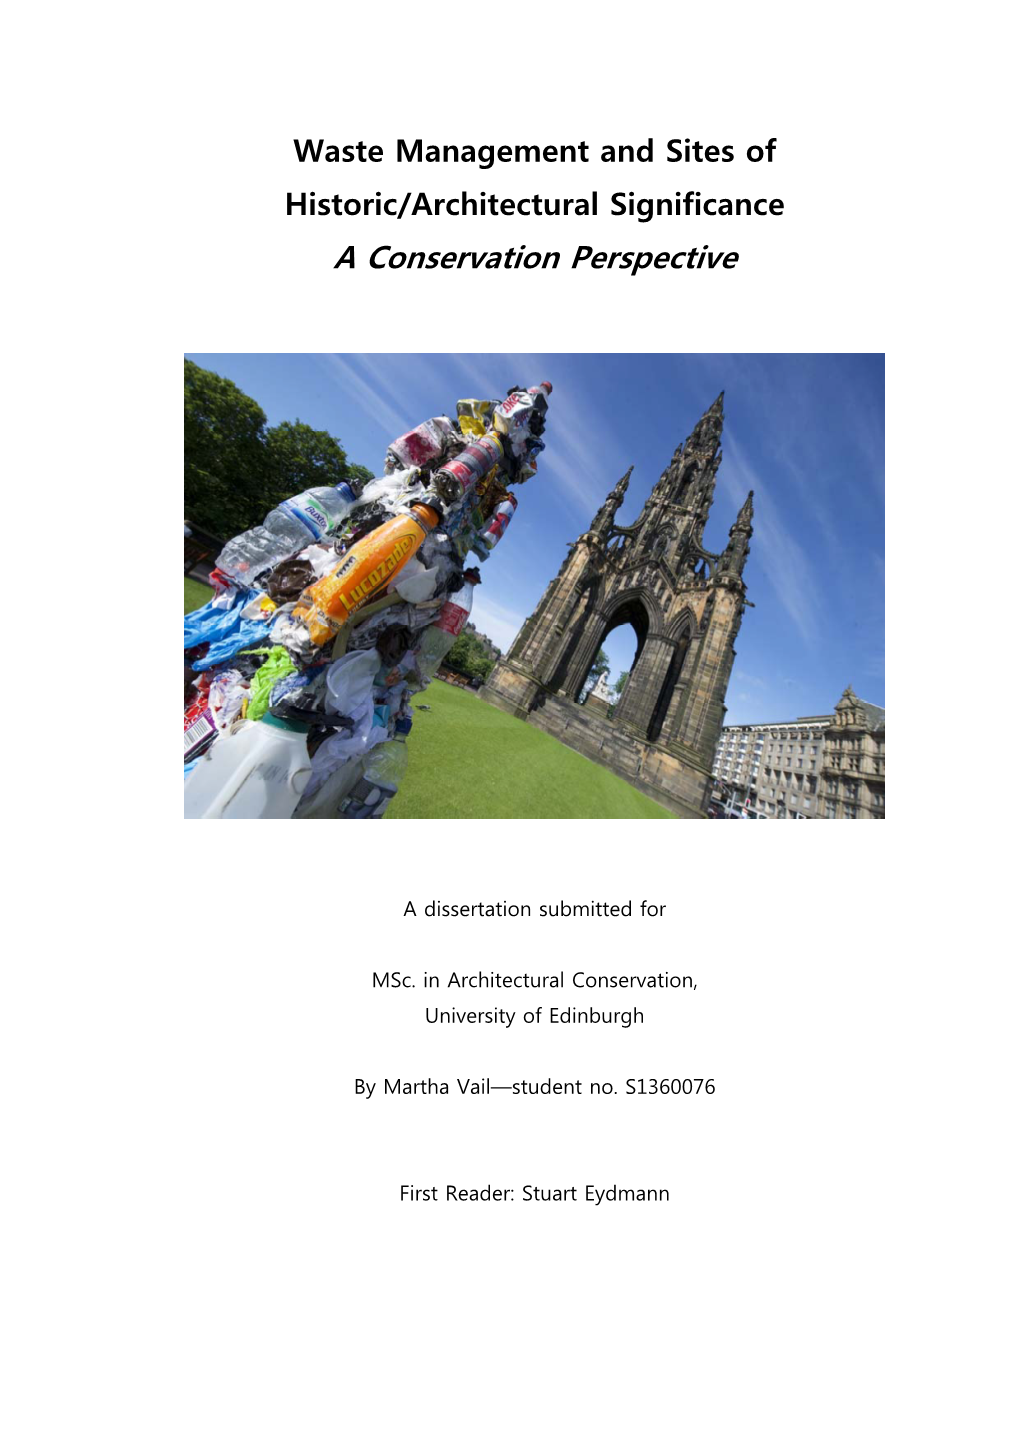 Waste Management and Sites of Historic/Architectural Significance a Conservation Perspective